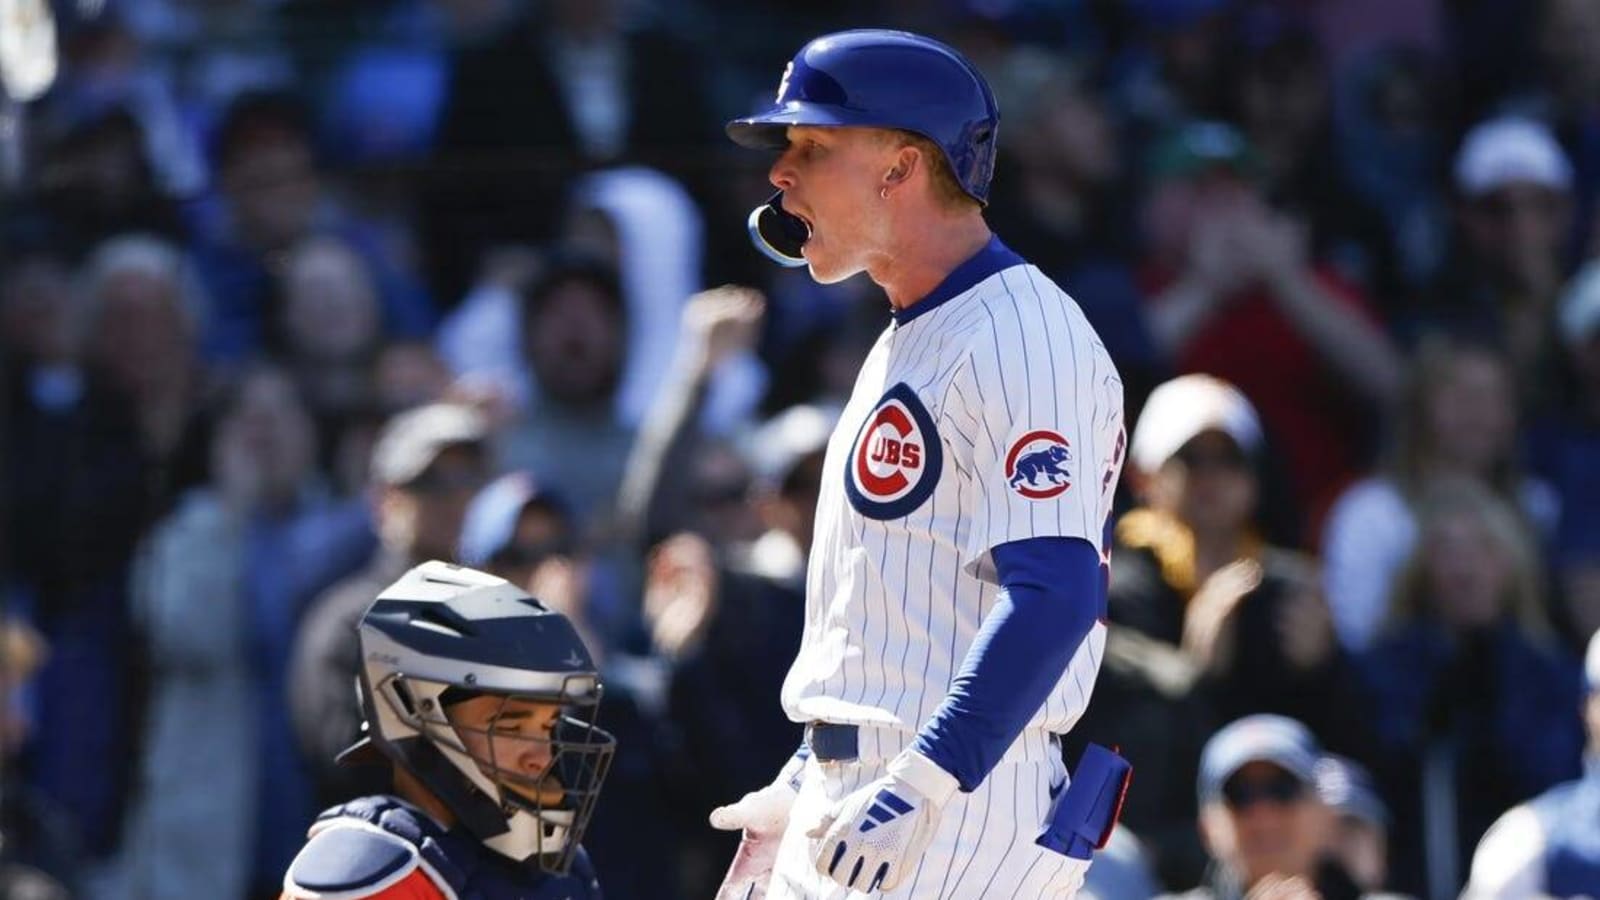 Rookie HR drives Cubs sweep of Astros; Chicago now MLB-best 10-3 at home